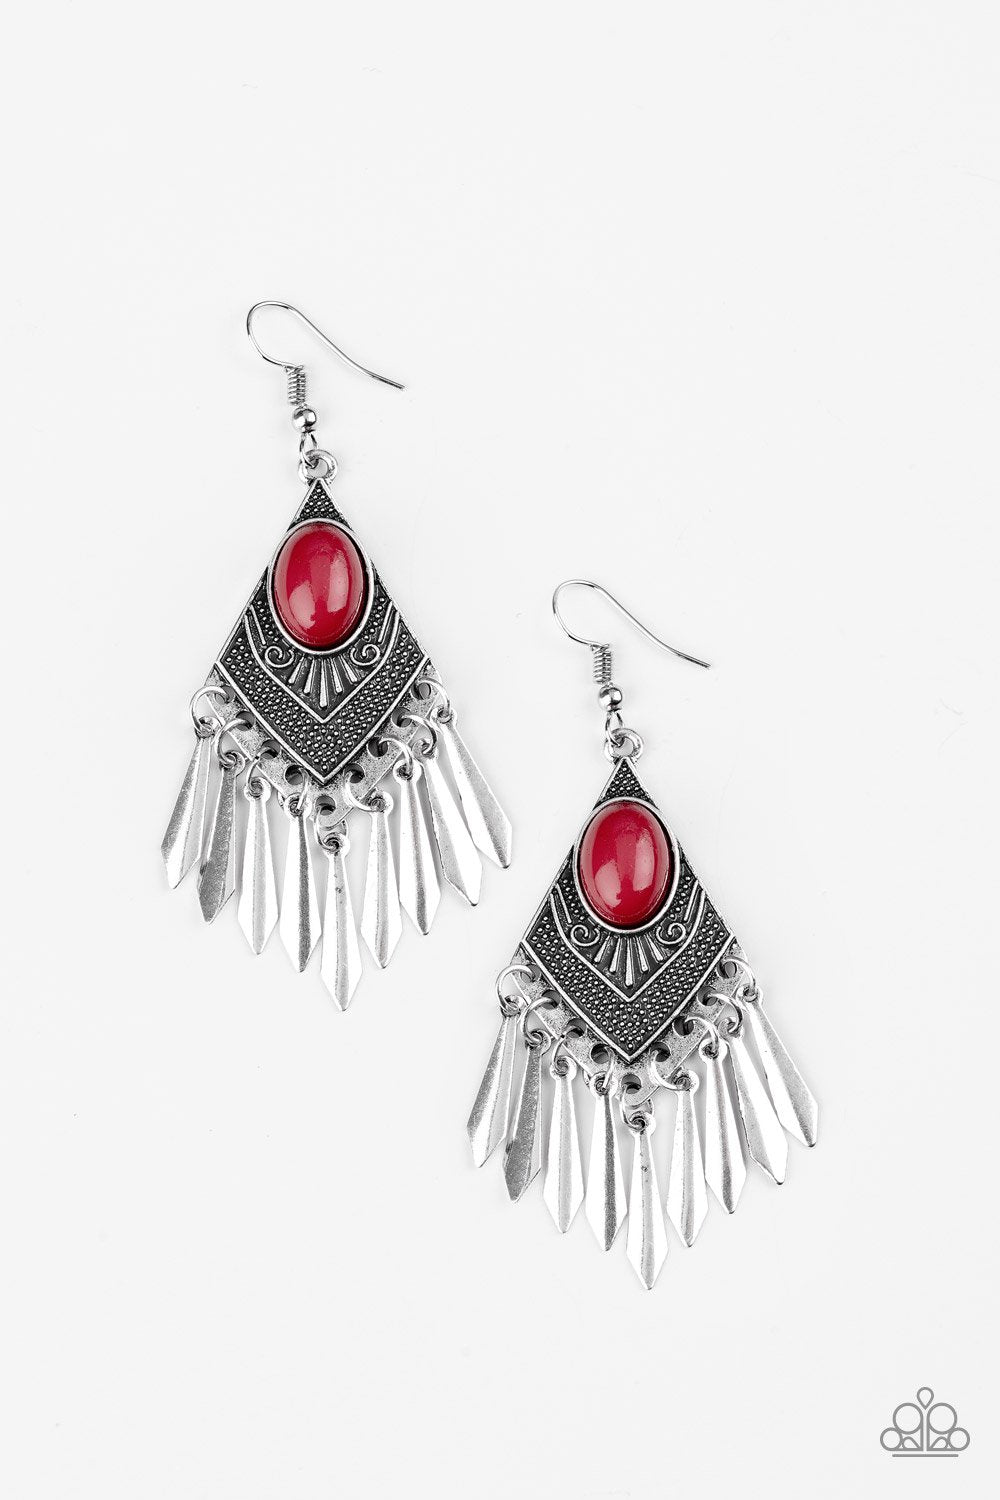 Mostly Monte-Zumba Red and Silver Earrings - Paparazzi Accessories-CarasShop.com - $5 Jewelry by Cara Jewels